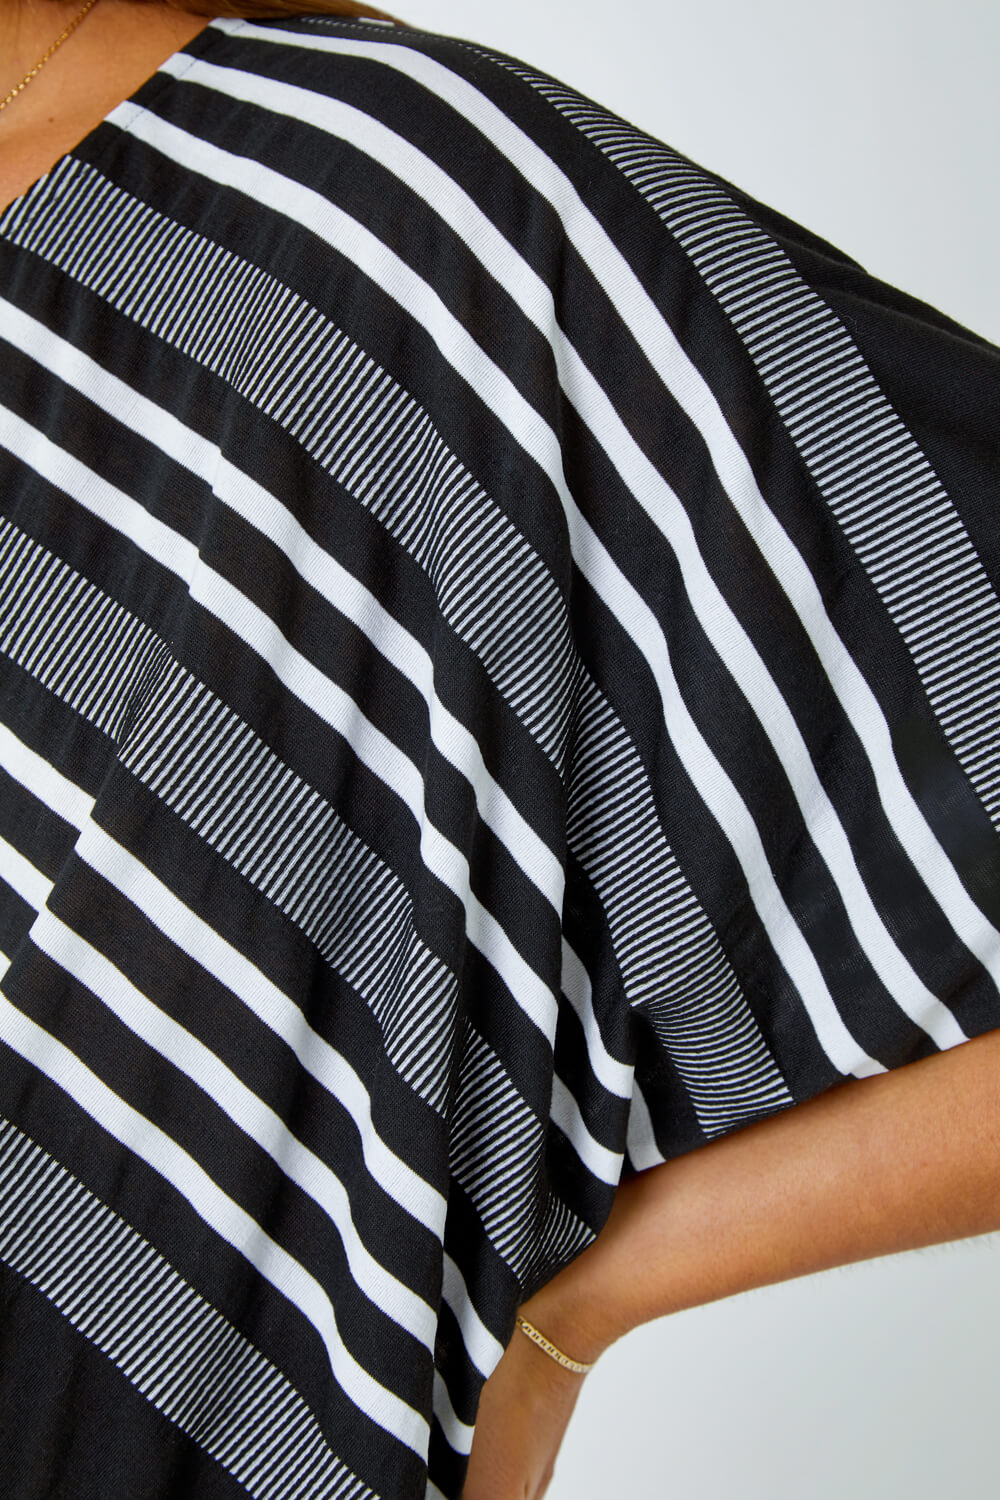 Black Relaxed Stripe Print Stretch Top, Image 5 of 5